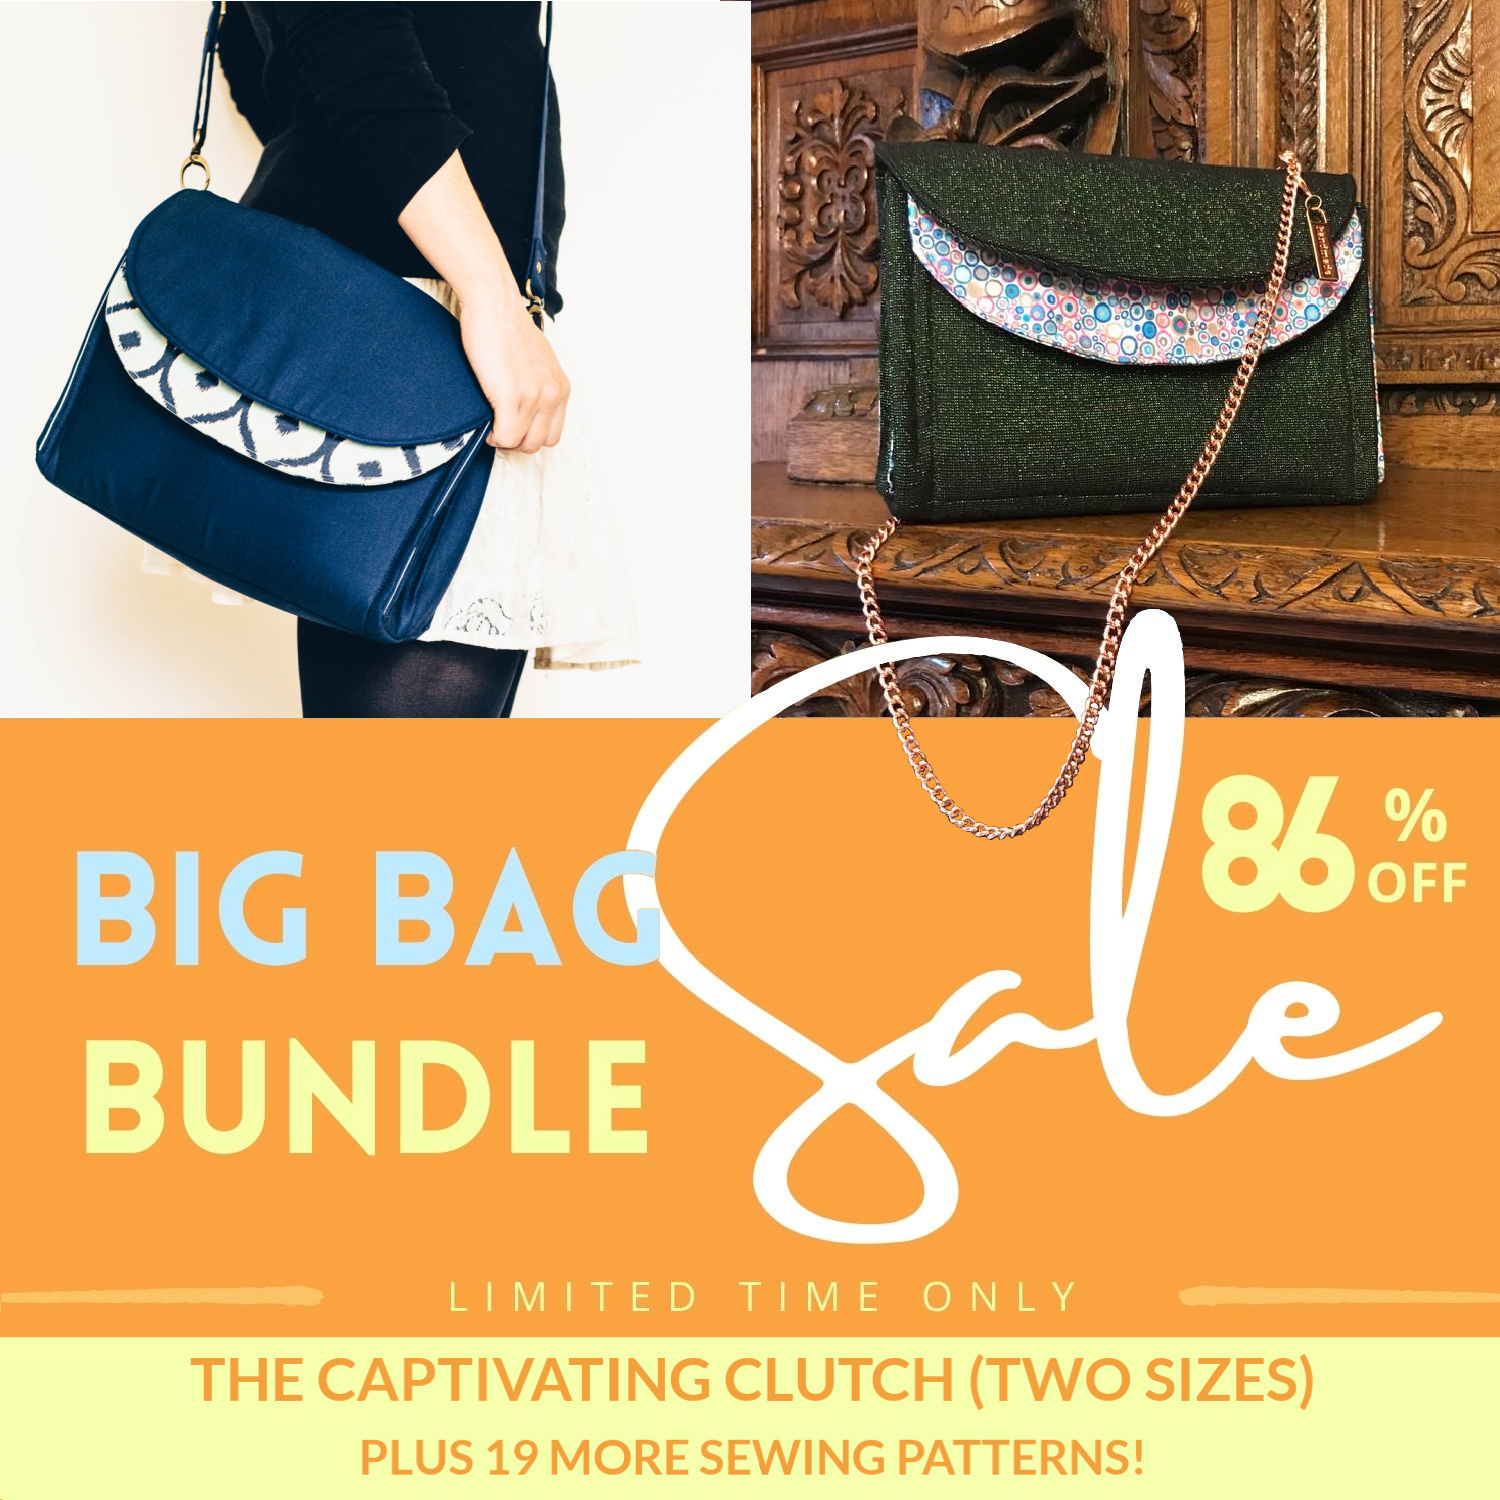 Big Bag Bundle Sale 86% discount, showing the Captivating Clutch from Sewing Patterns by Mrs H in two sizes